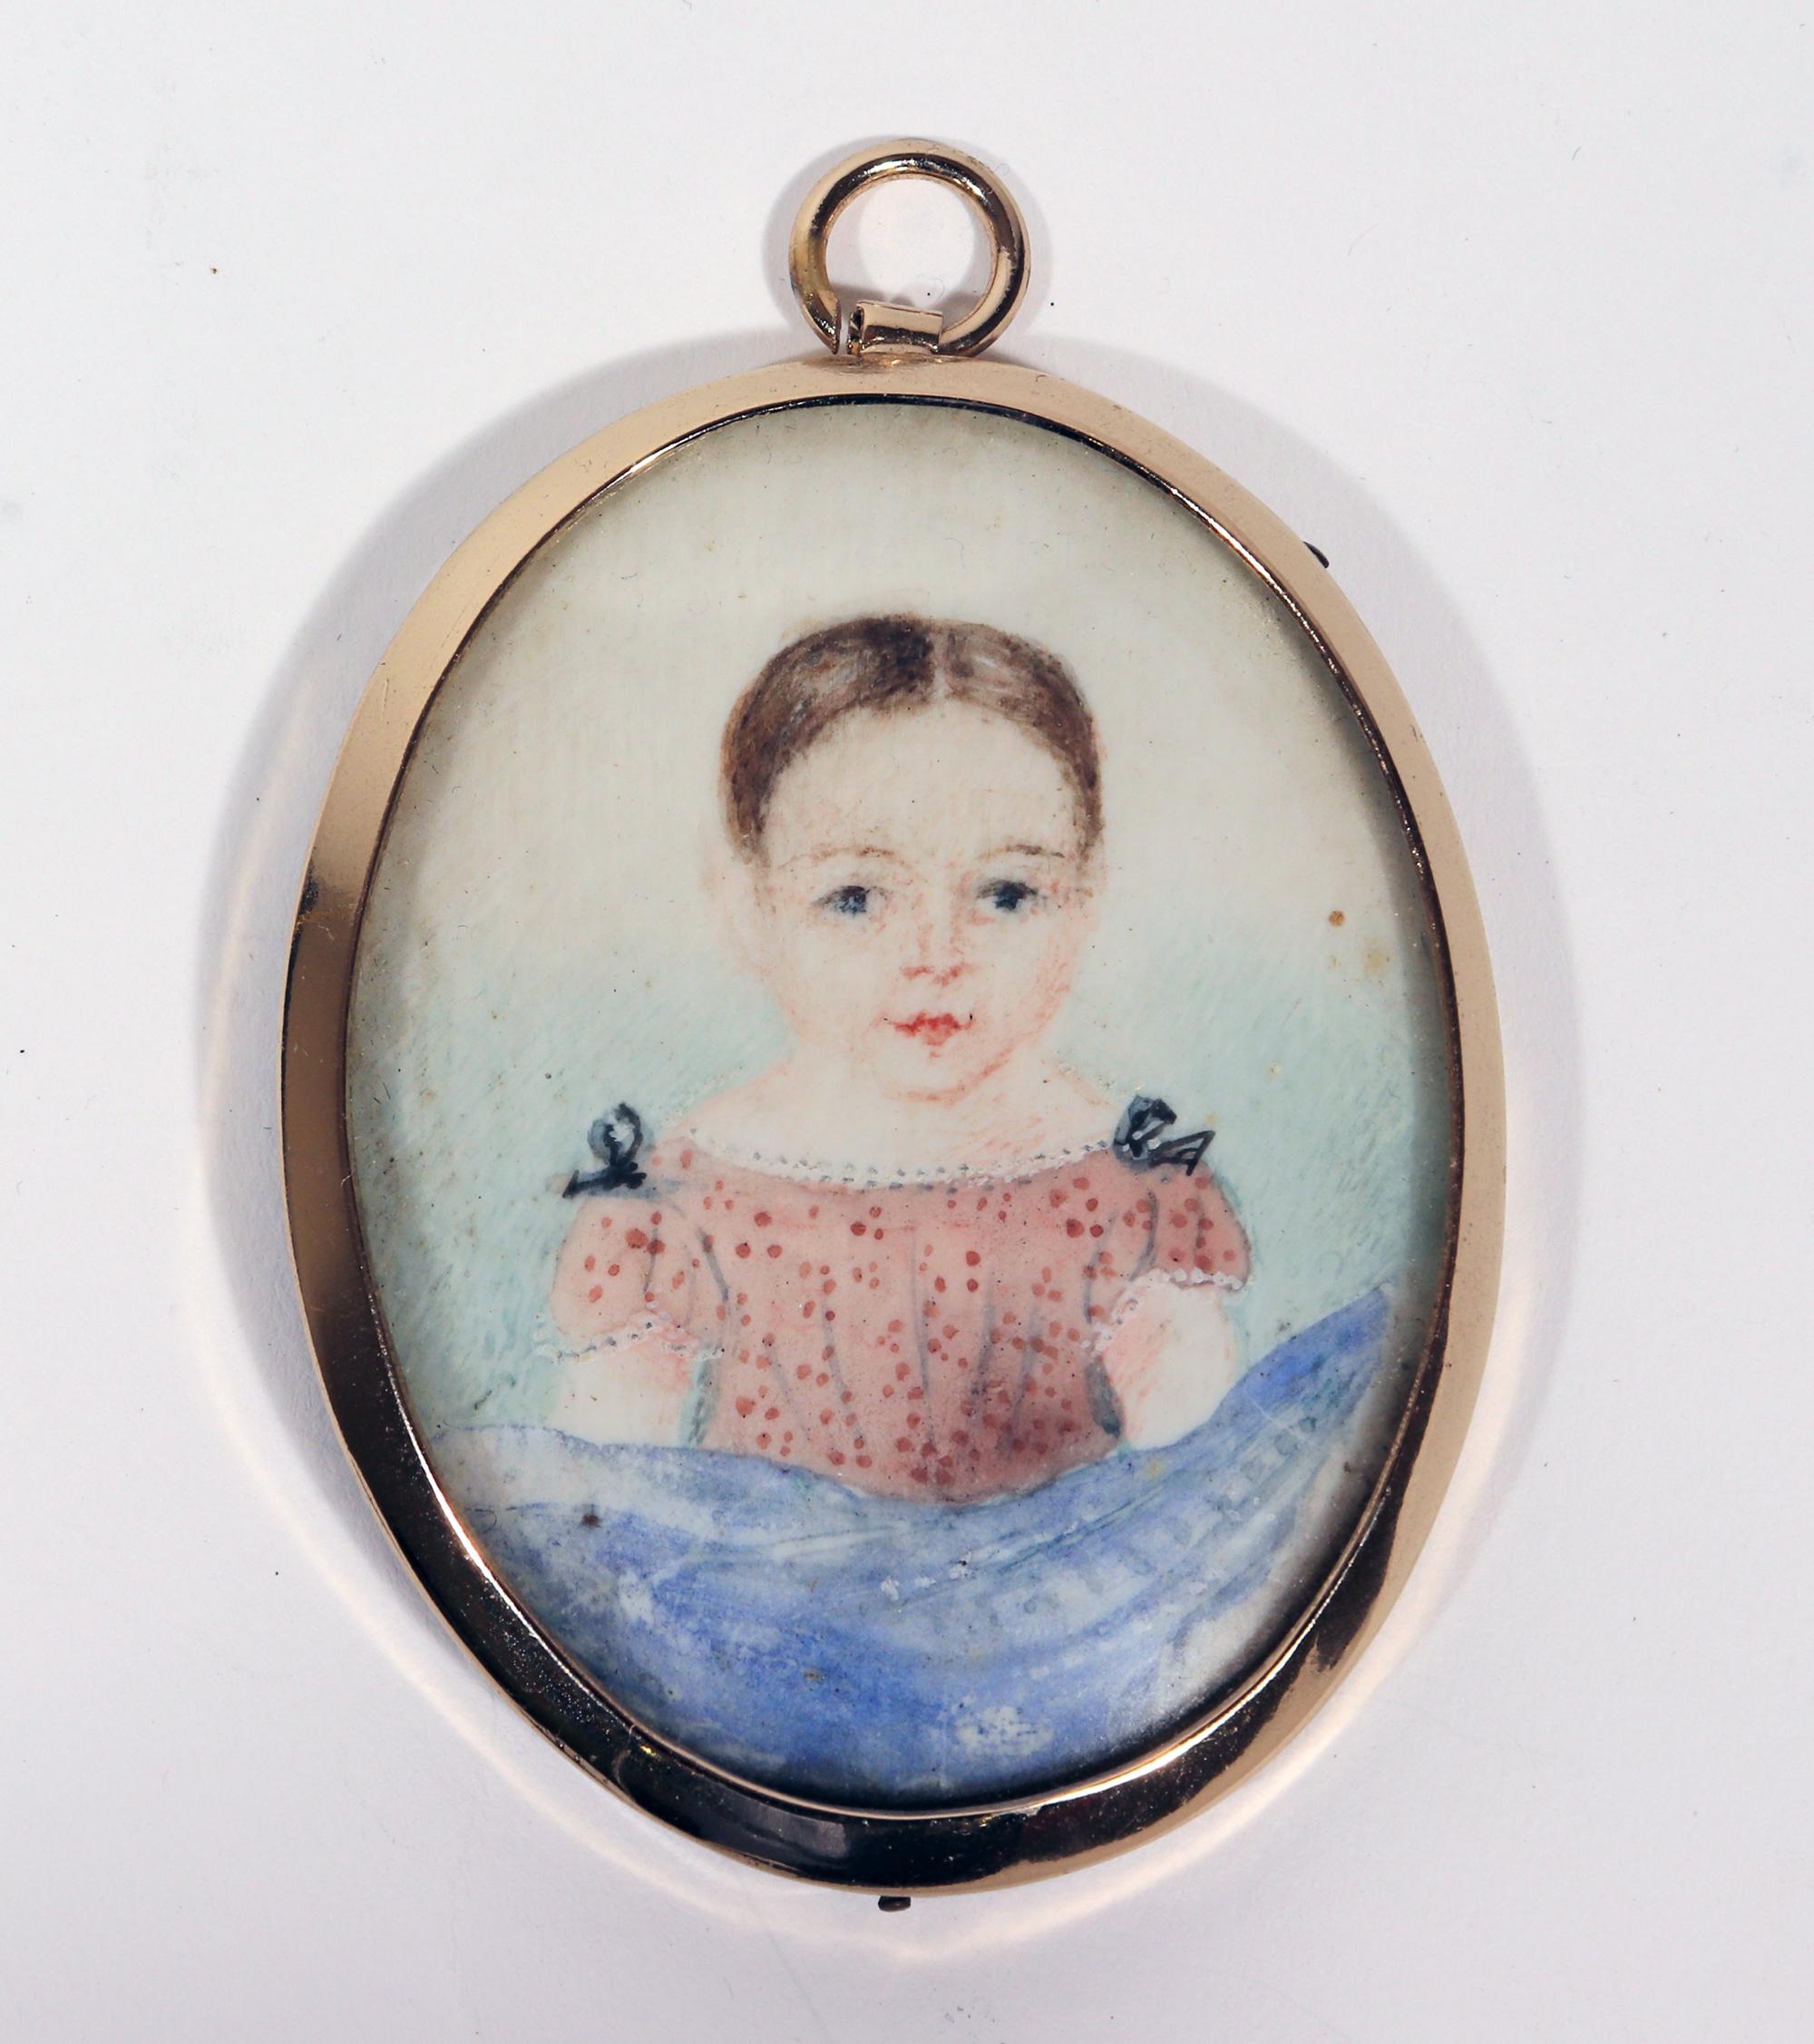 Portrait Miniature of a young girl,
American,
1840s

The oval portrait miniature is painted with a folky painting of a young girl wearing an ocher dress with blue ribbons on the shoulders with a blue skirt below. Her short brown hair is parted